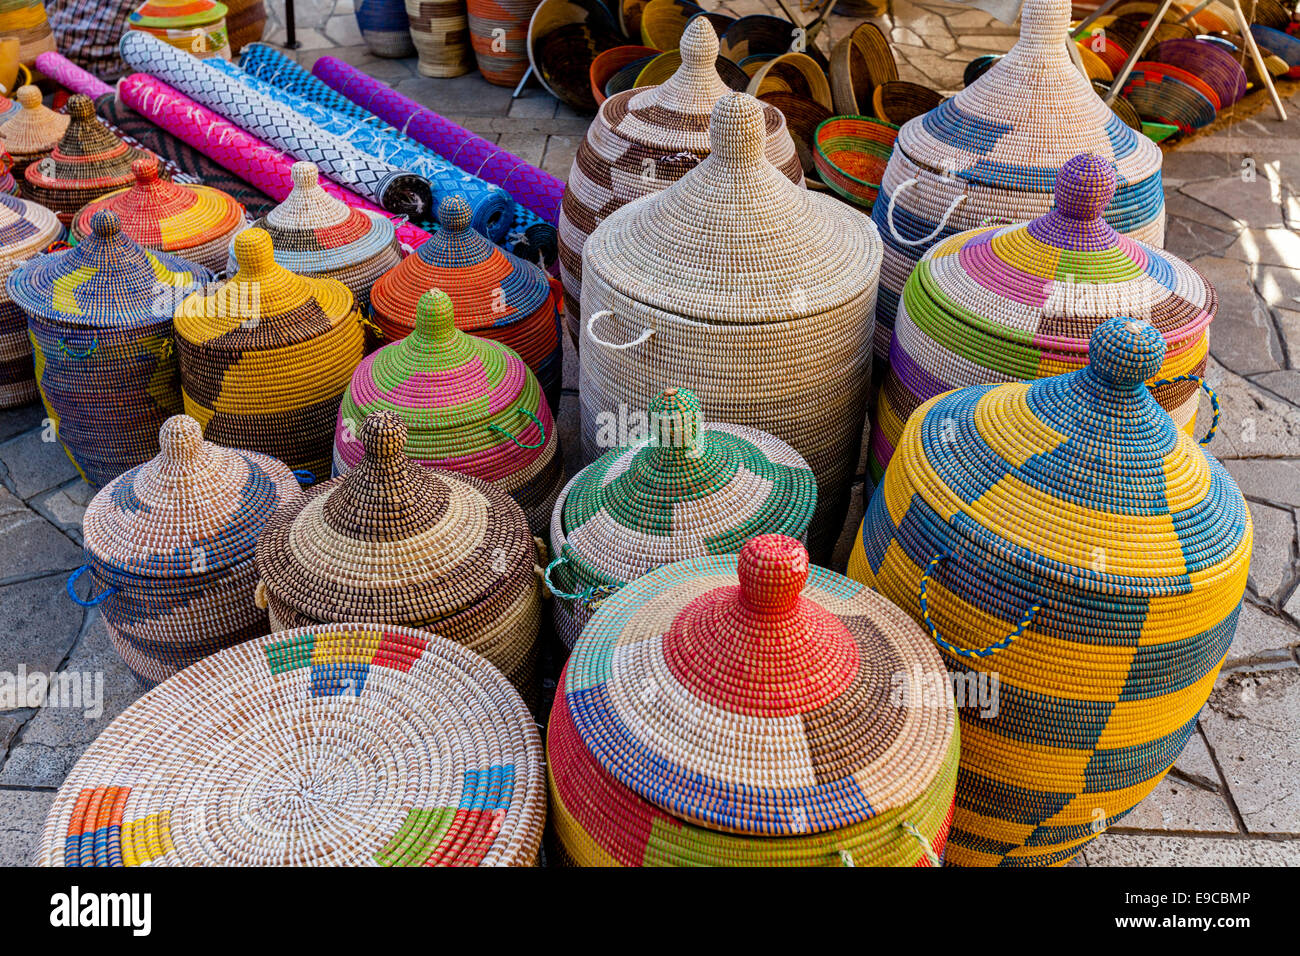 Colourful Baskets For Sale At The Thursday Market In Inca ...